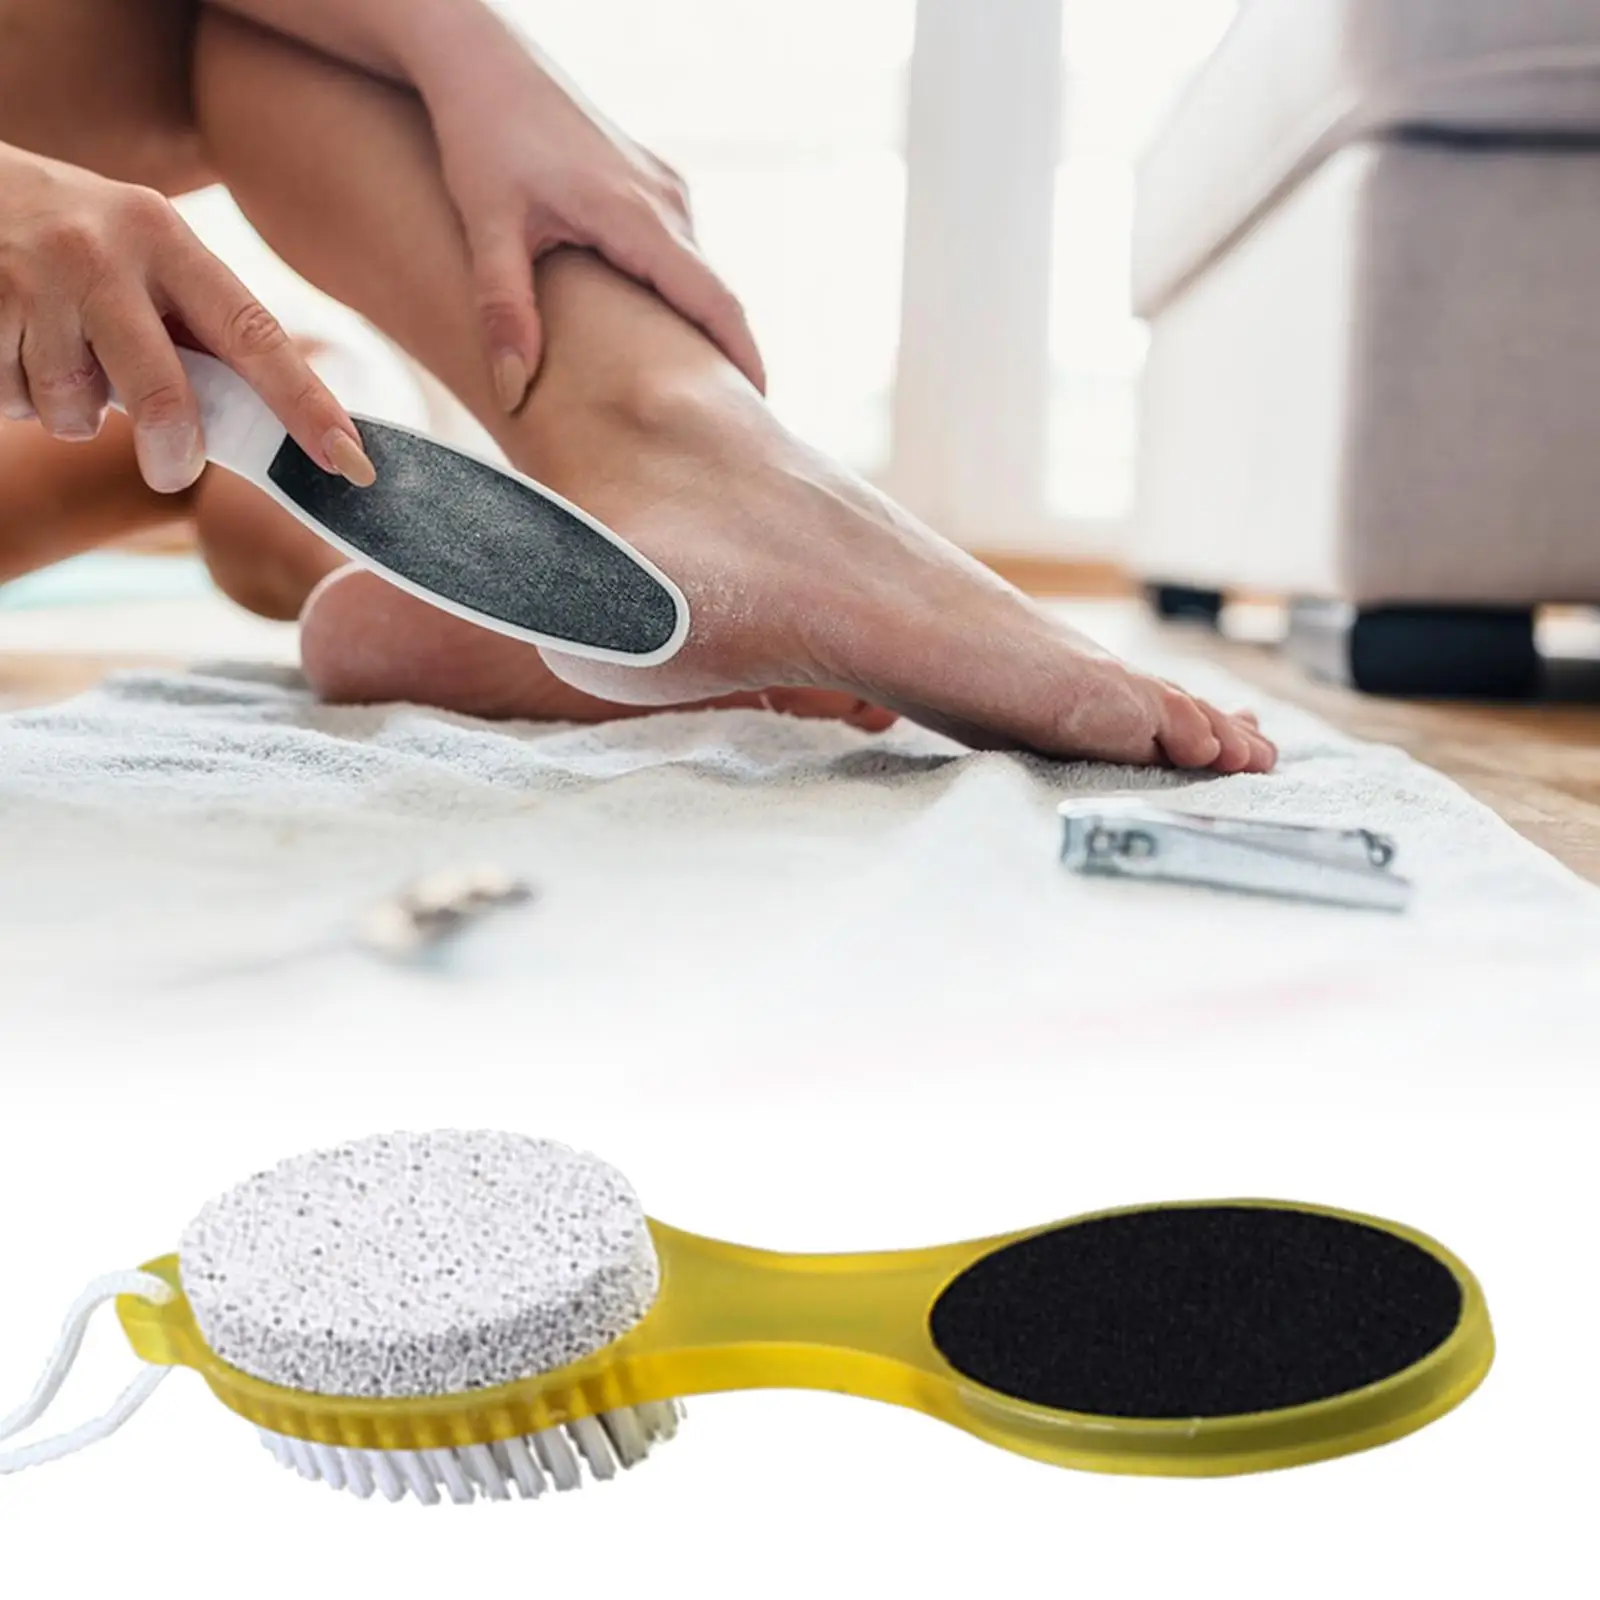 Pedicure Paddle Kit Tool Toe Nail Cleaning Brush Pumice Stone Sand Paper Pedicure Kit for Feet Hand Foot Care Home Women